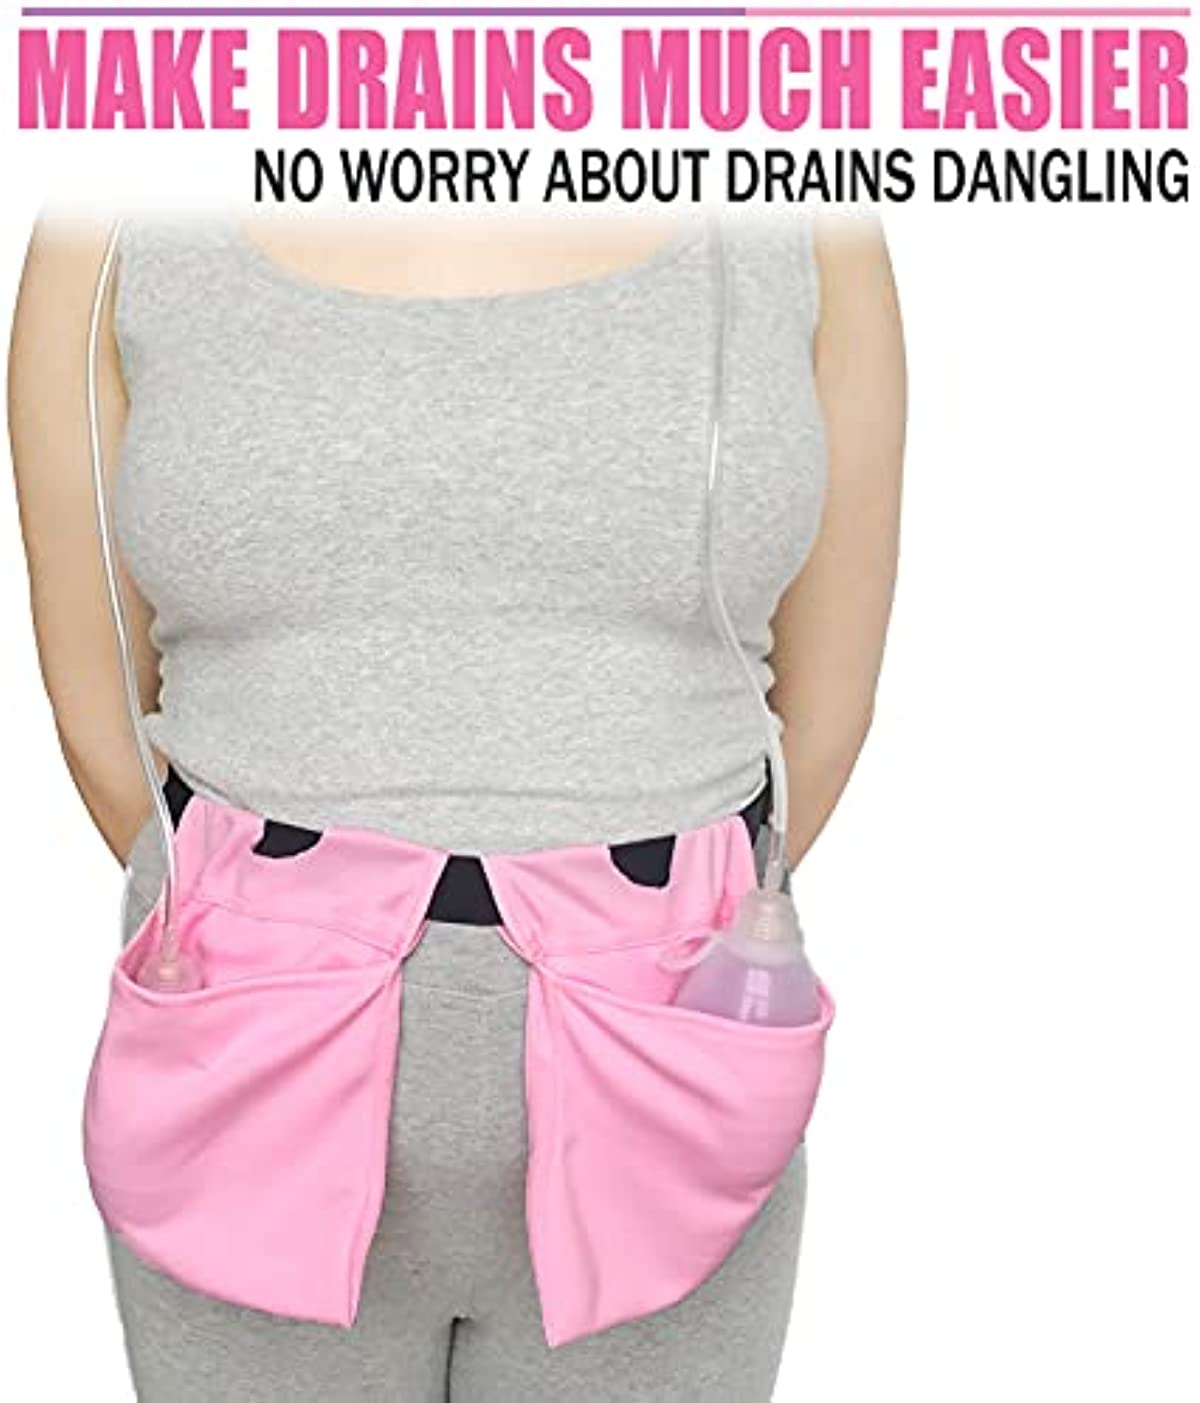 Large Capacity Mastectomy Drain Holder Tummy Tuck Post Surgery Drainage Pouch Supplies, Movable Stretchy JP Drains Pockets Management Breast Reconstruction/Abdomina/Explant, Pink